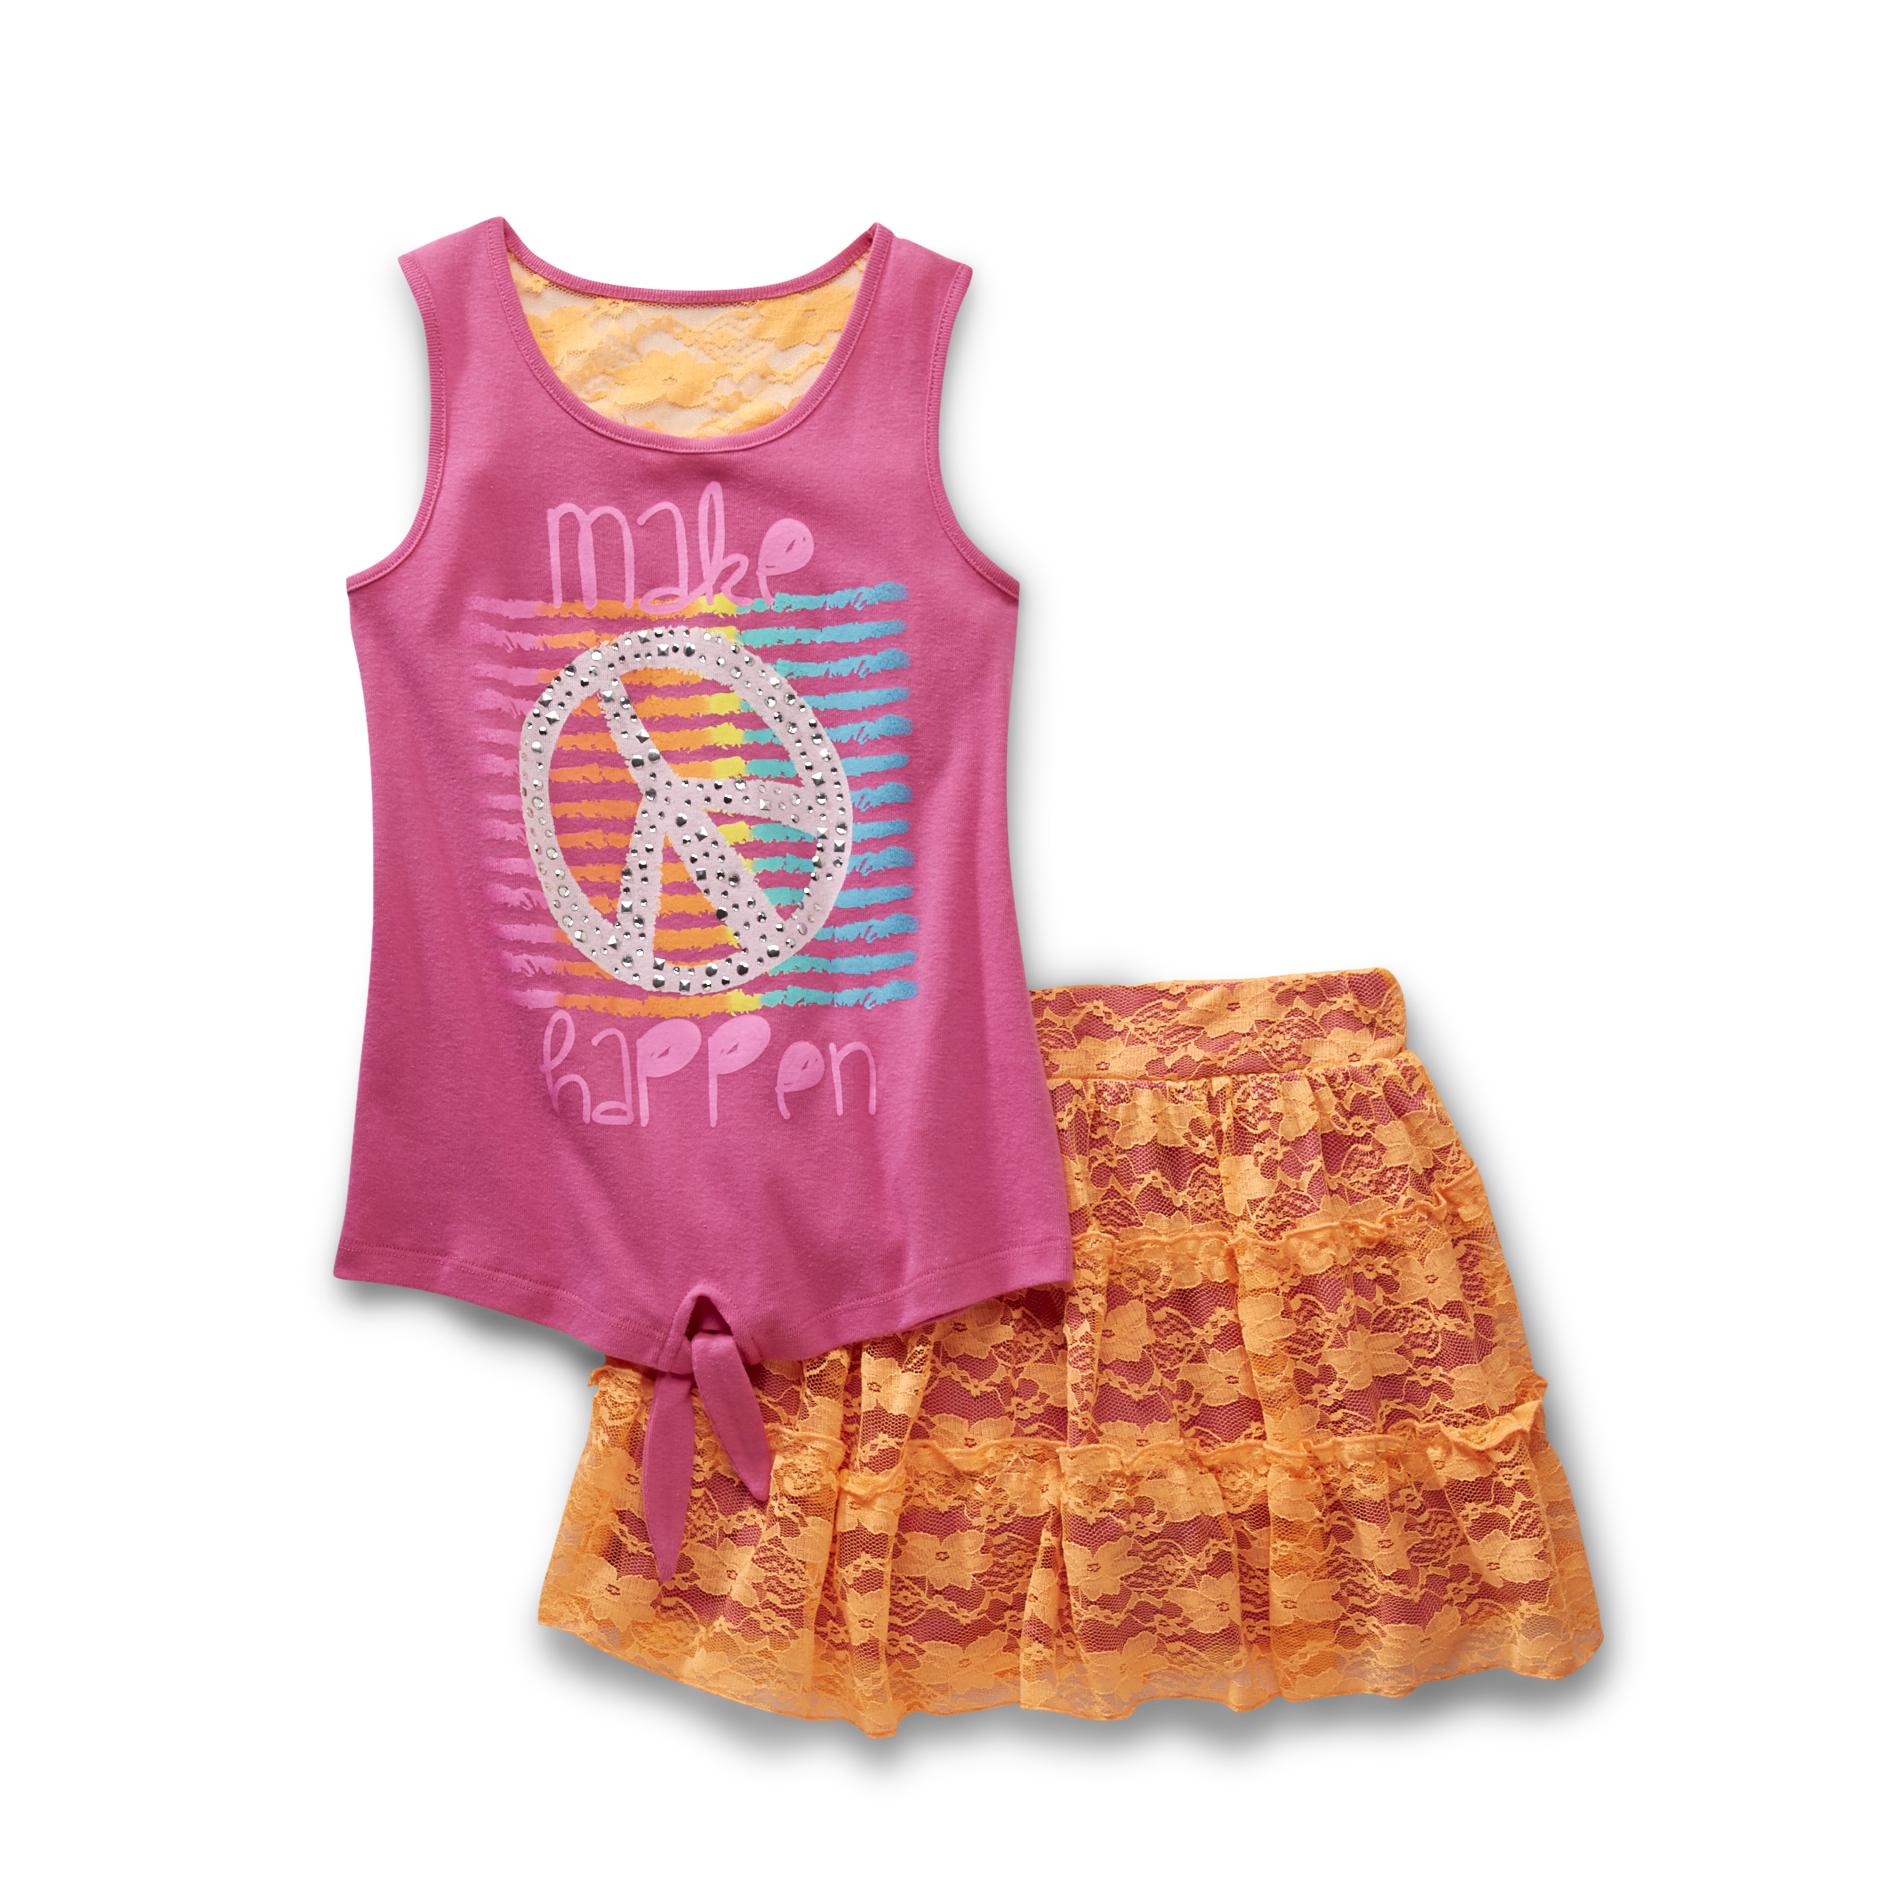 Piper Girl's Graphic Tank Top & Skirt - Peace Sign